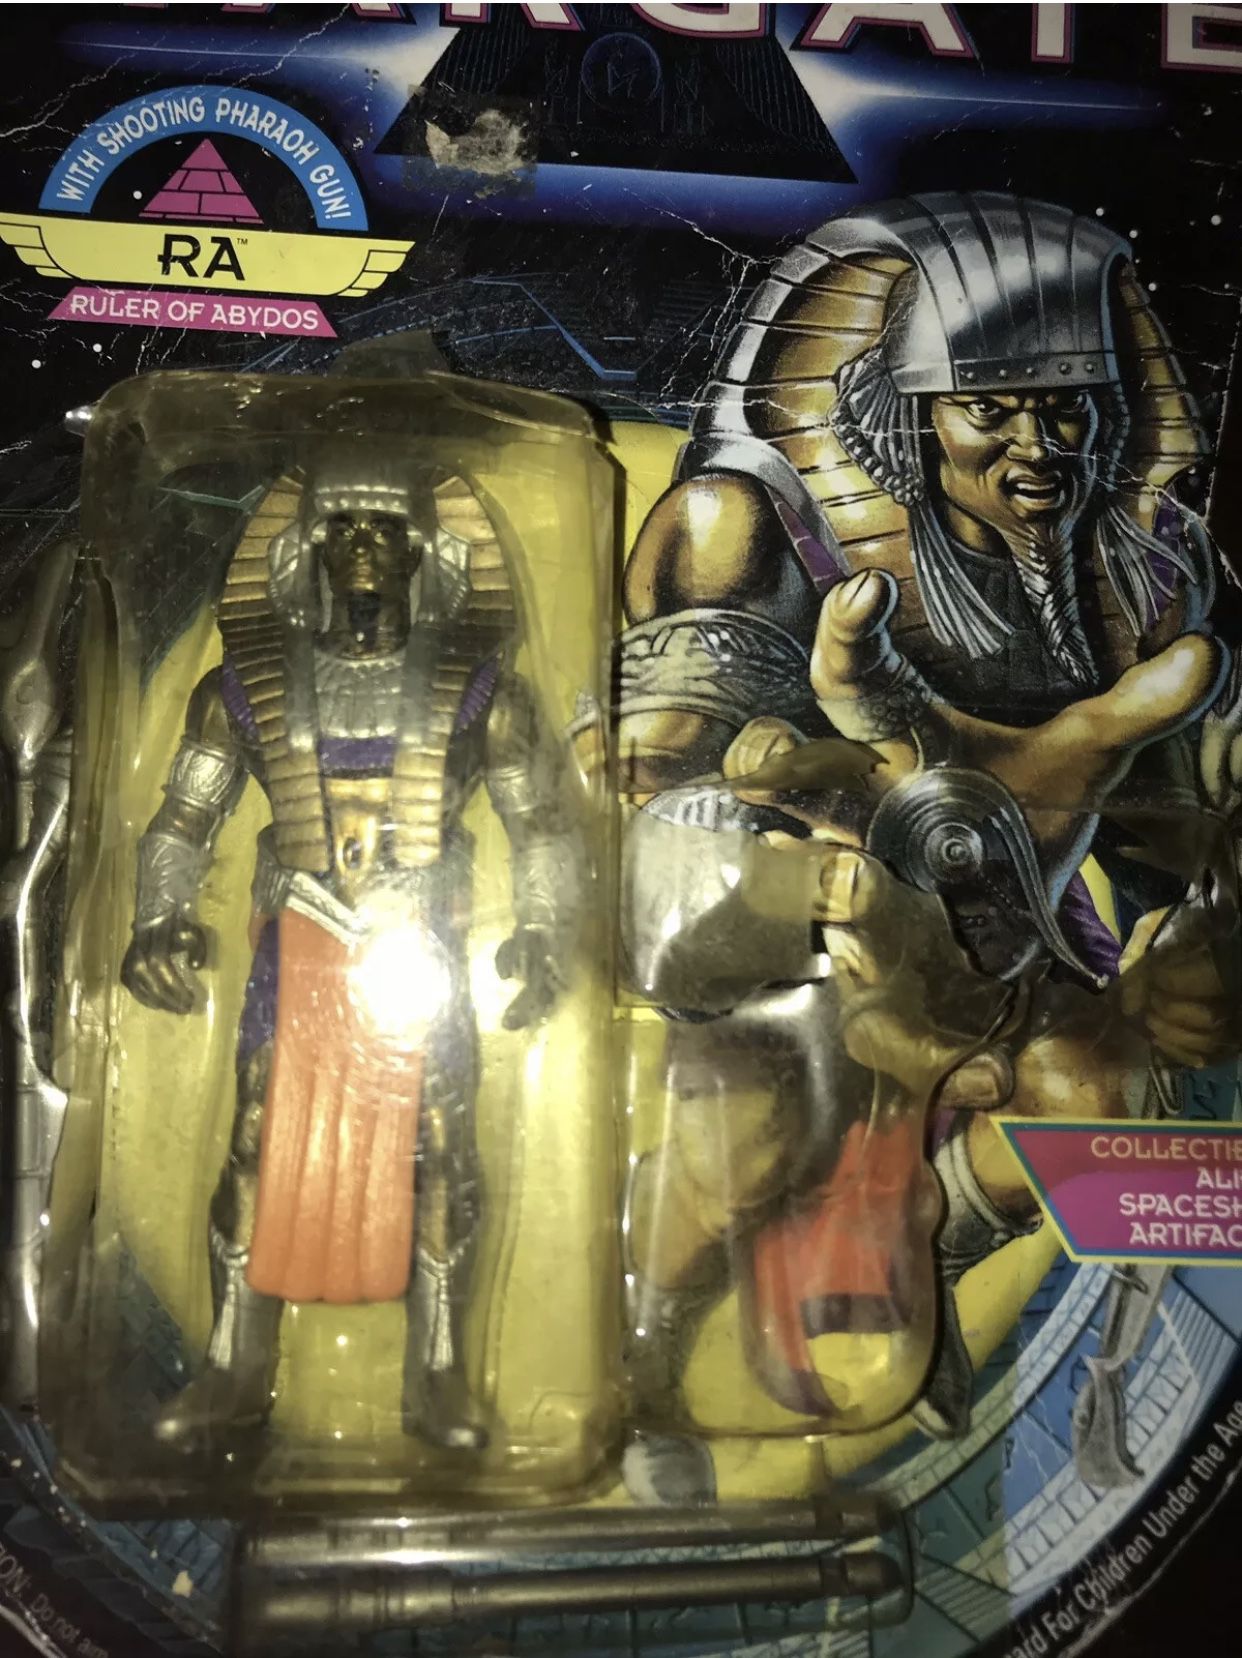 Collectible Ra Ruler of Abydos Action Figure Stargate Animated Series 1994 New